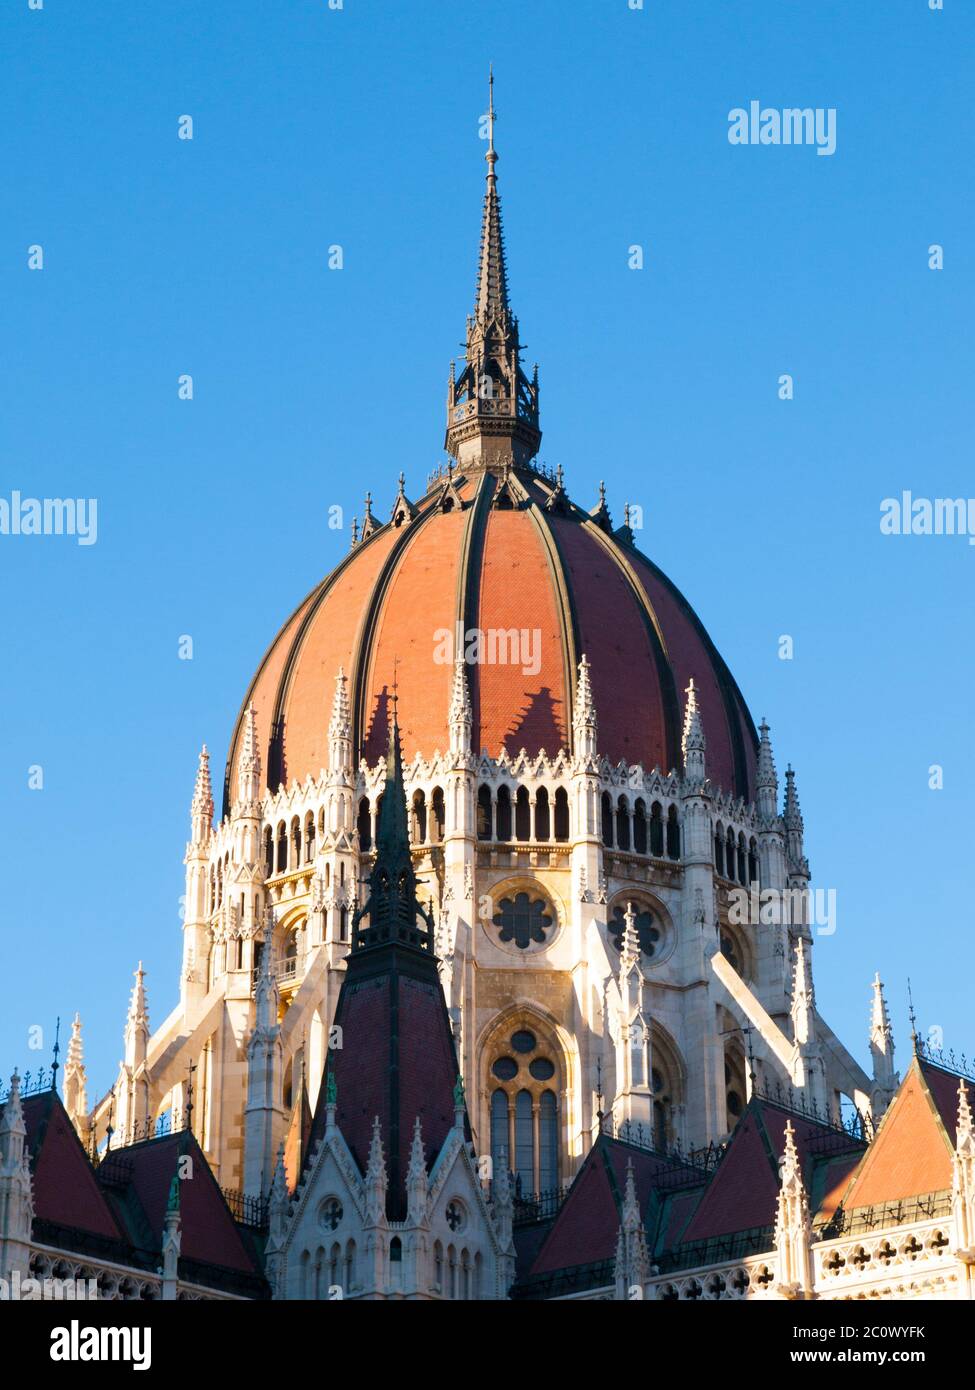 Detailed view of historical building of Hungarian Parliament, aka Orszaghaz, with typical central dome on clear blue sky background. Budapest, Hungary, Europe. It is notable landmark and seat of the National Assembly of Hungary. UNESCO World Heritage Site. Stock Photo